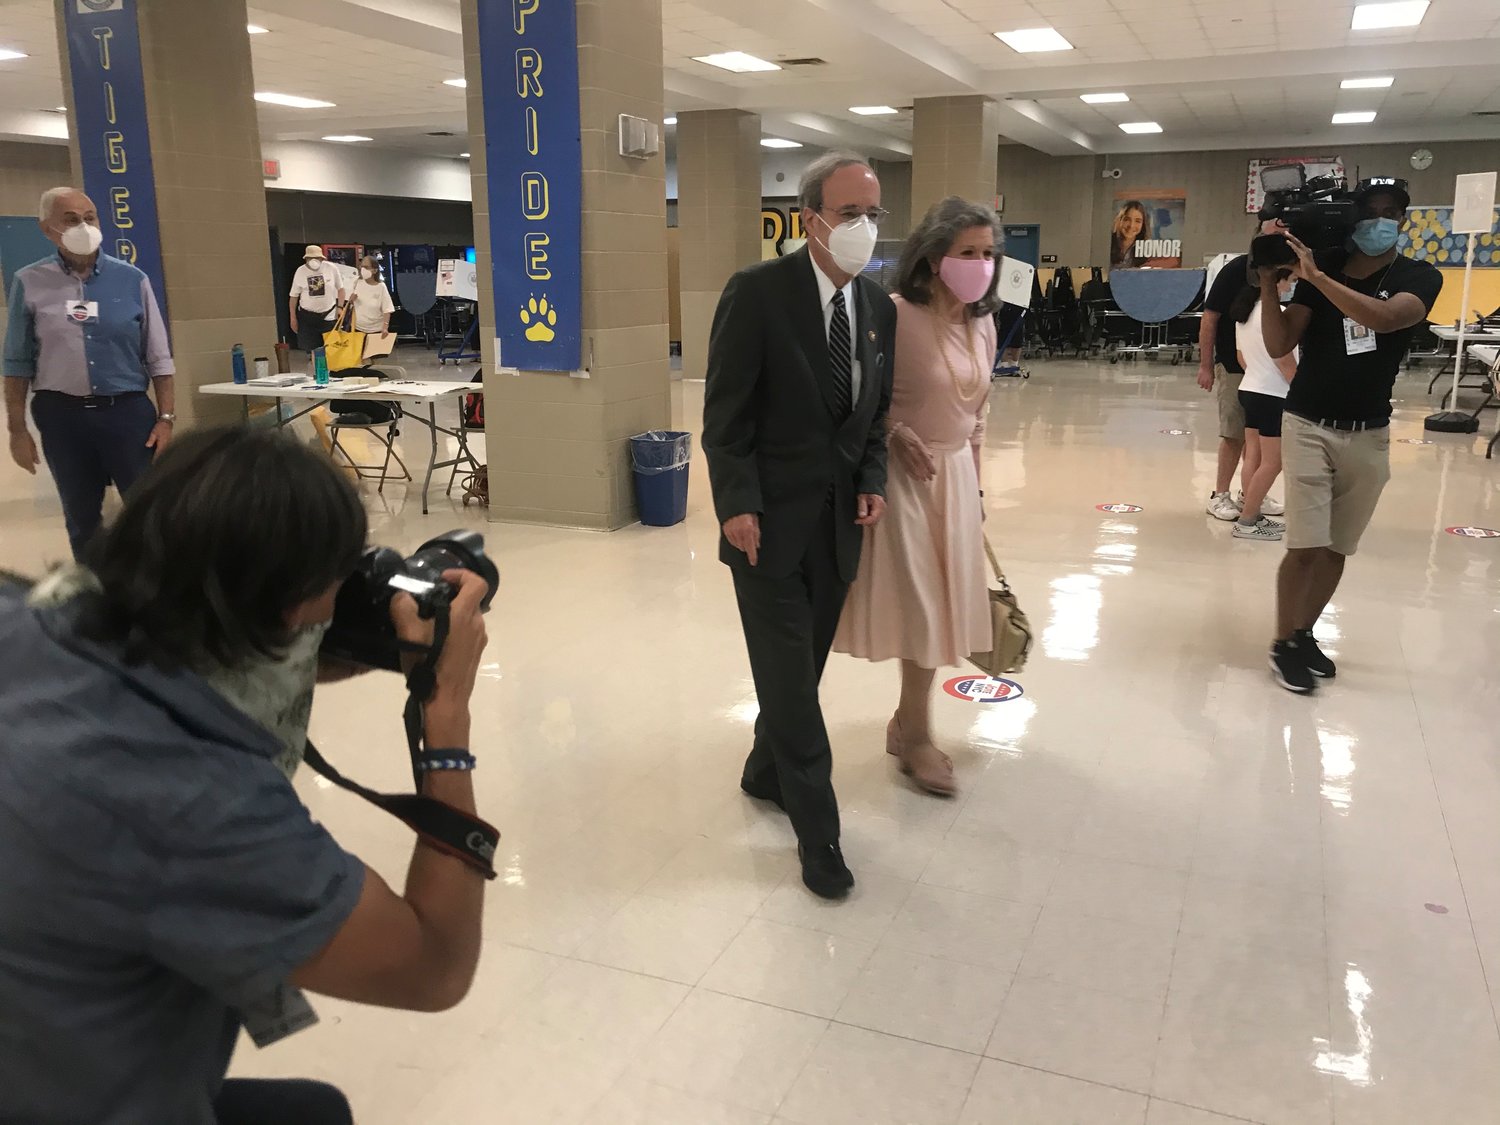 U.S. Rep. Eliot Engel is accompanied by his wife Patricia while casting his ballot at Riverdale/Kingsbridge Academy on Tuesday. Early returns show Engel well behind his primary challenger, Jamaal Bowman.